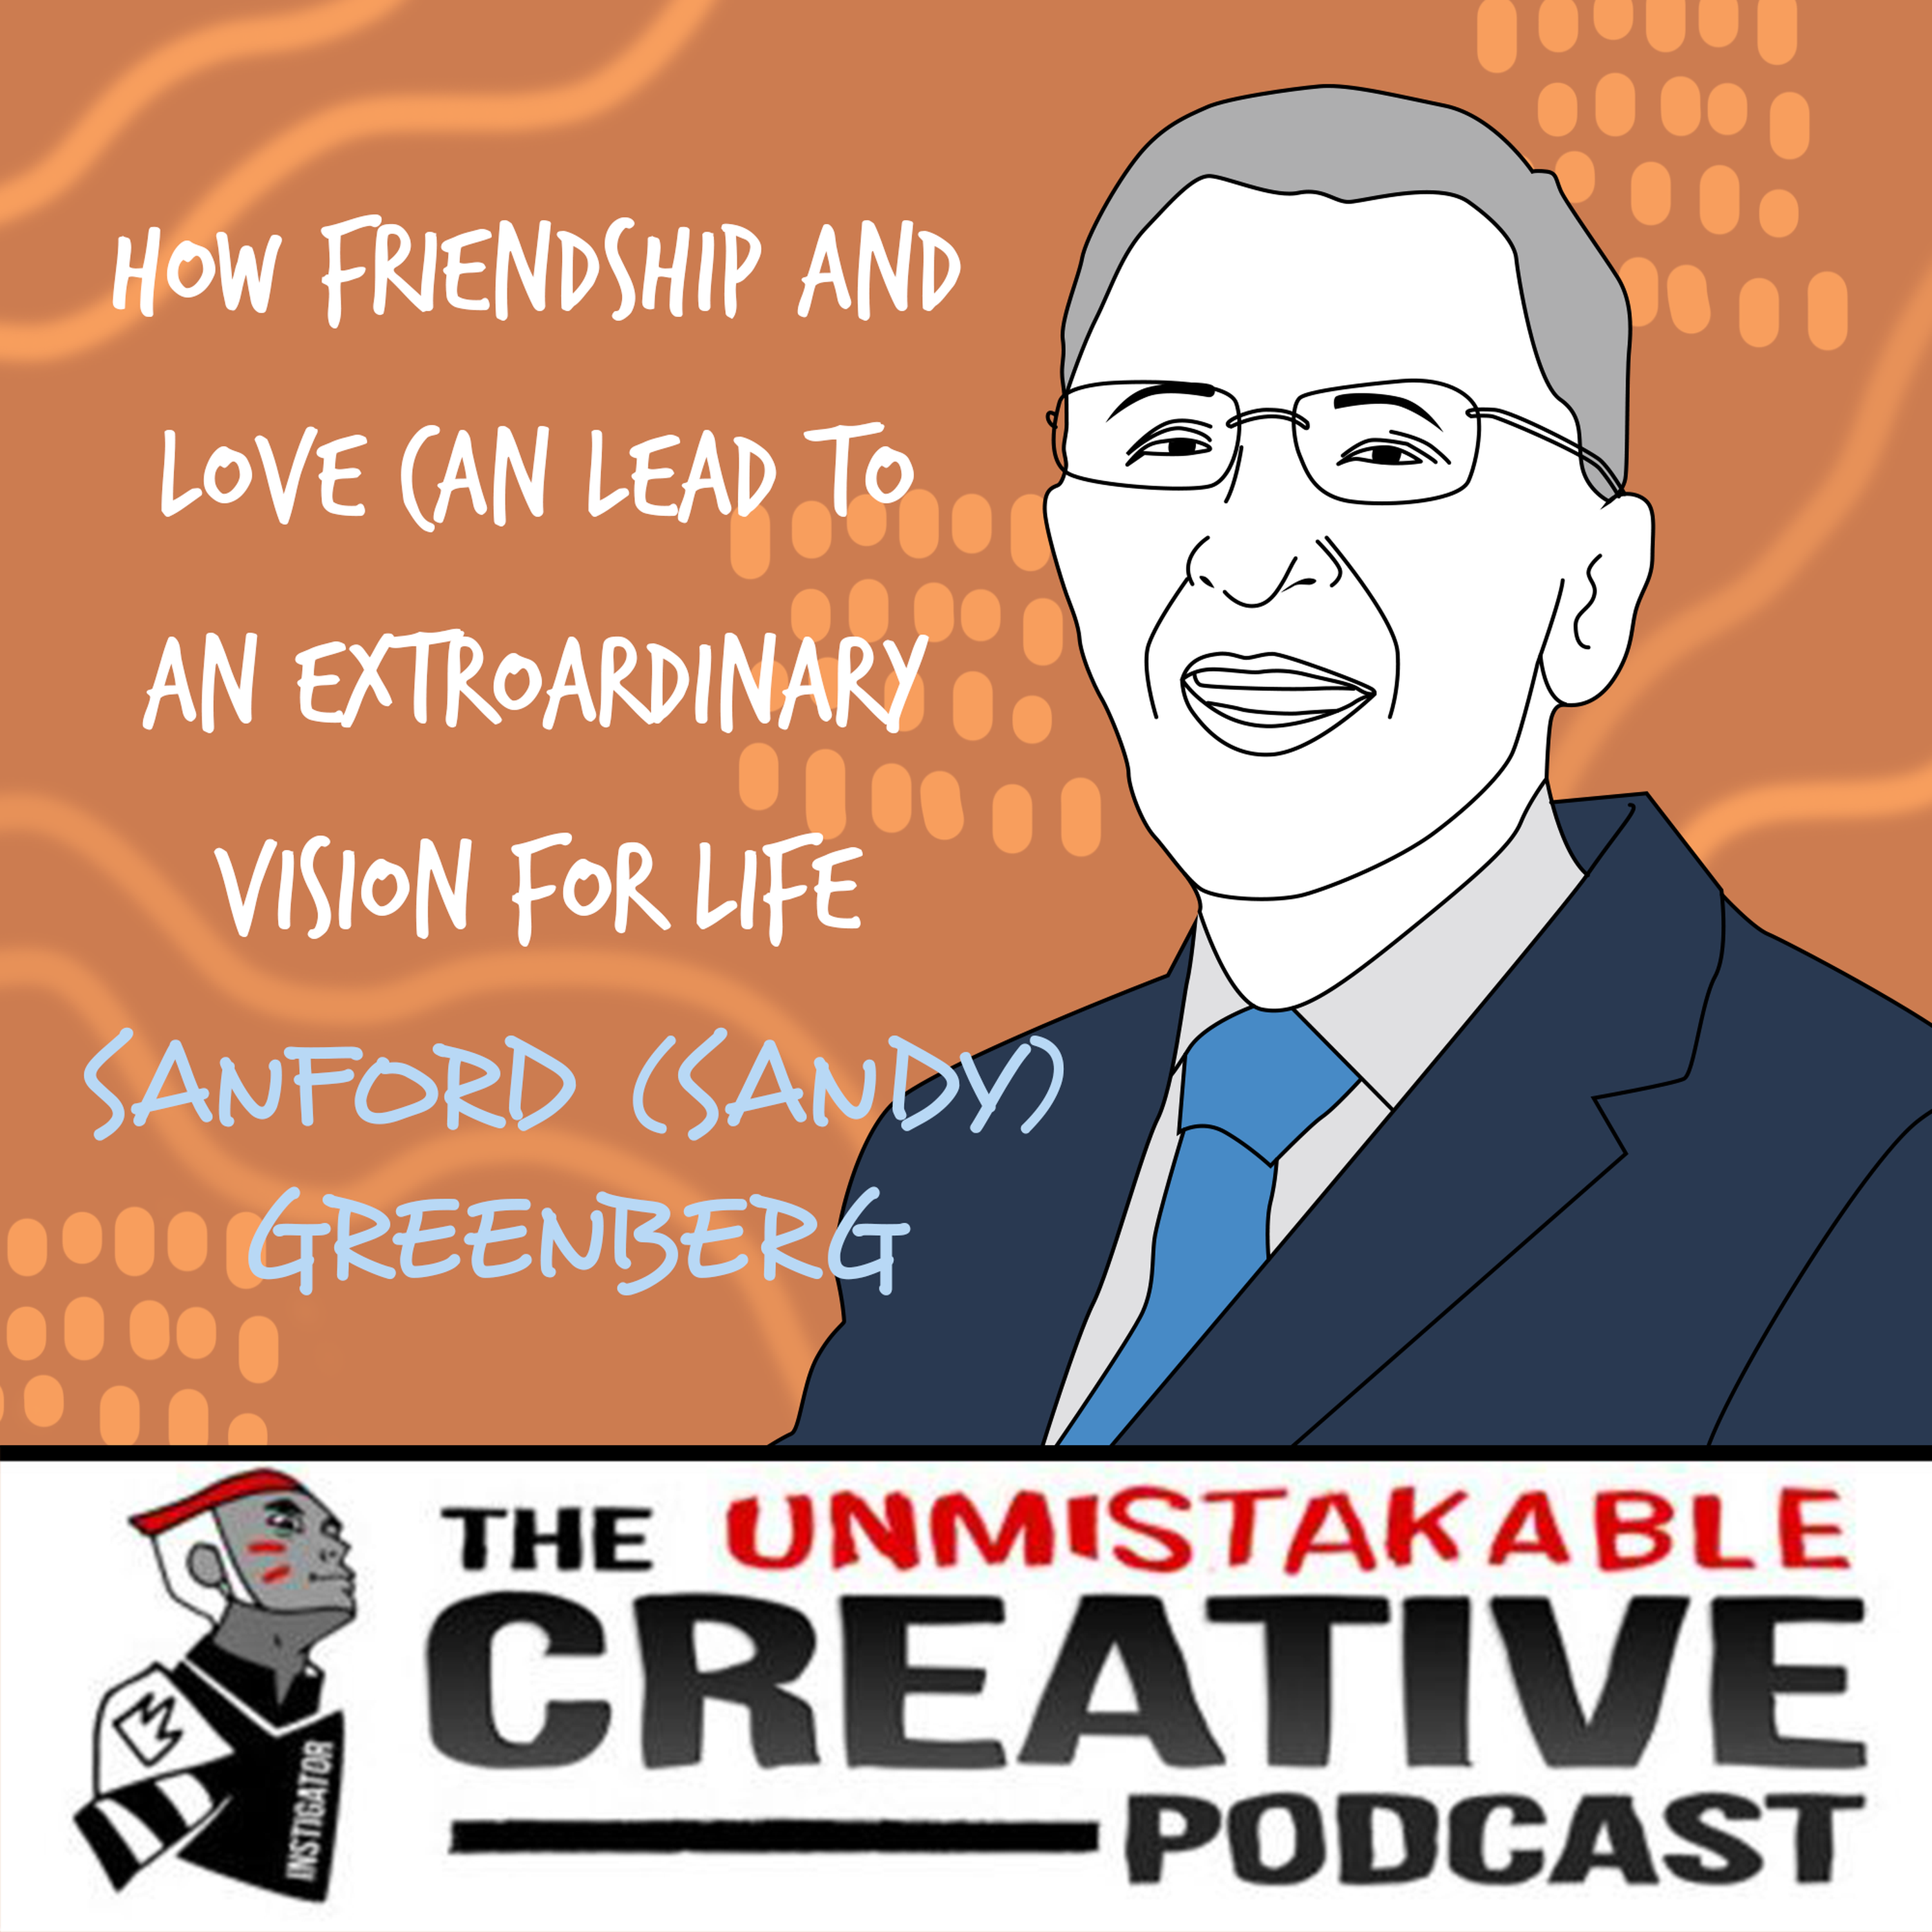 Sandy Greenberg | How Friendship and Love Can Lead to An Extraordinary Vision for Life Image